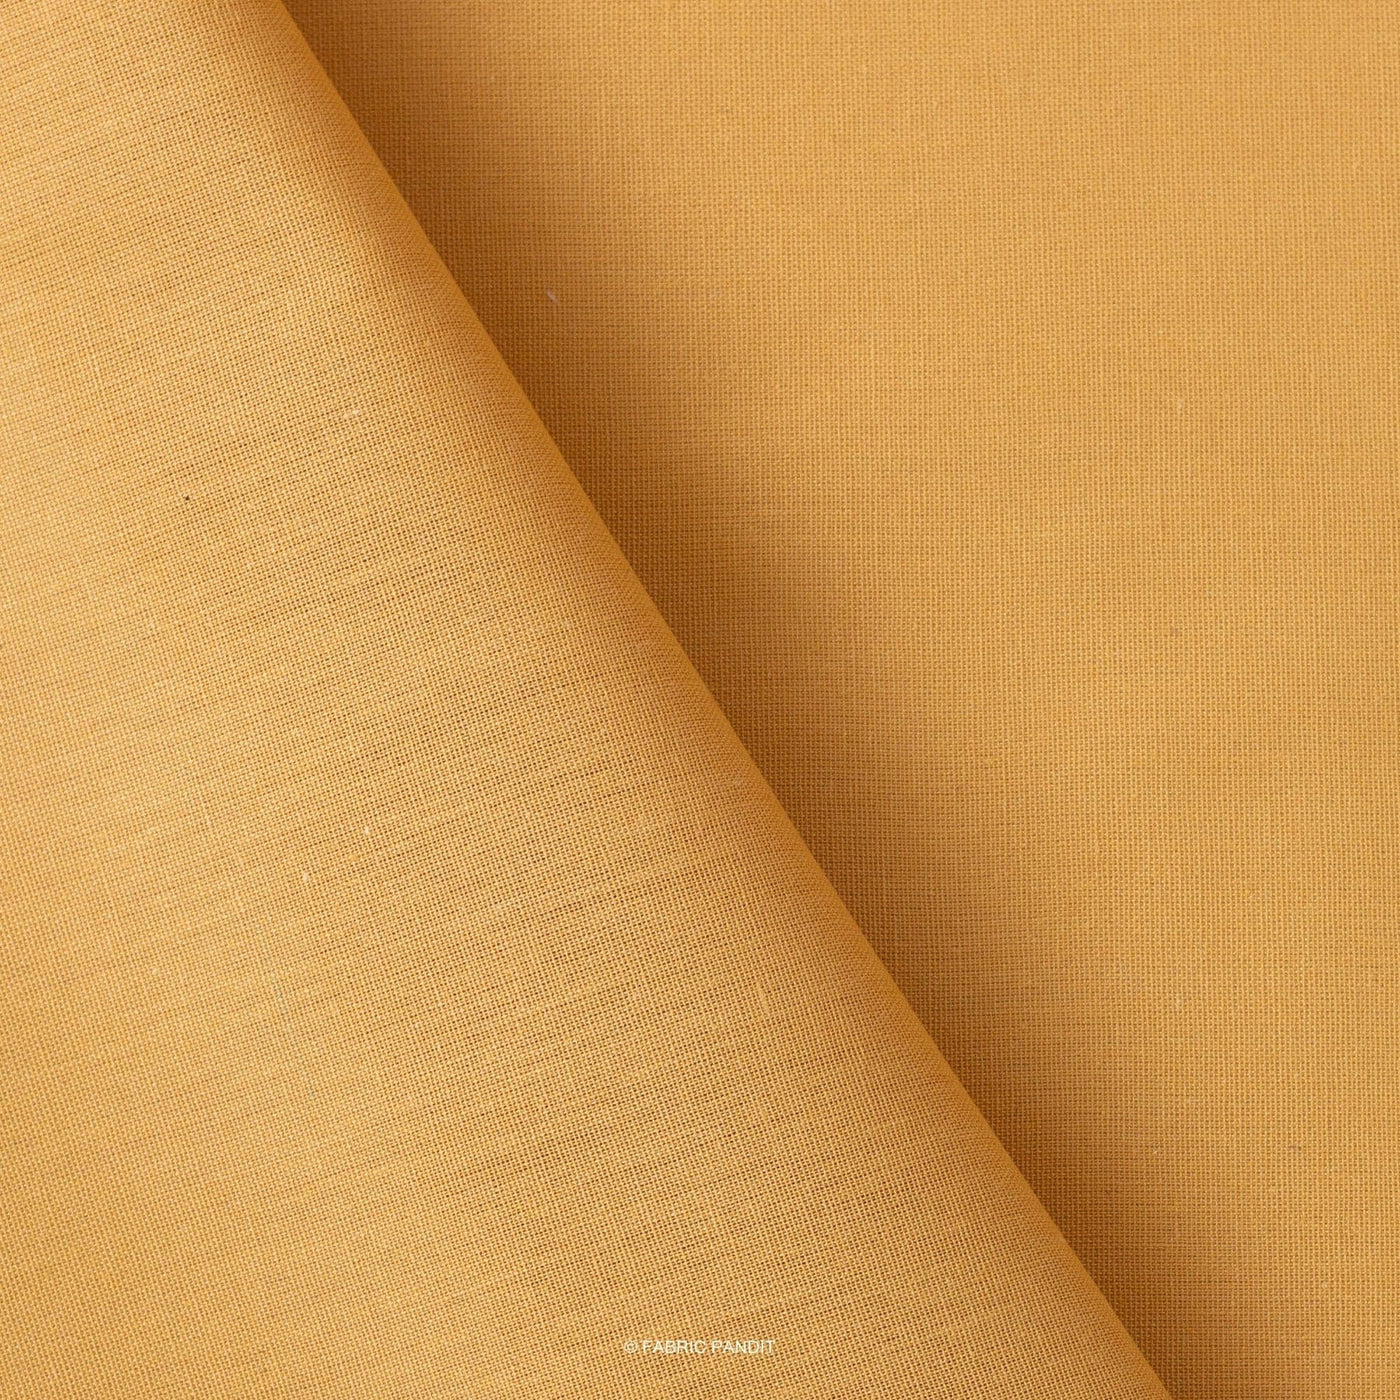 Fabric Pandit Fabric Golden Sand Color Pure Cotton Linen Fabric (Width 58 Inches)